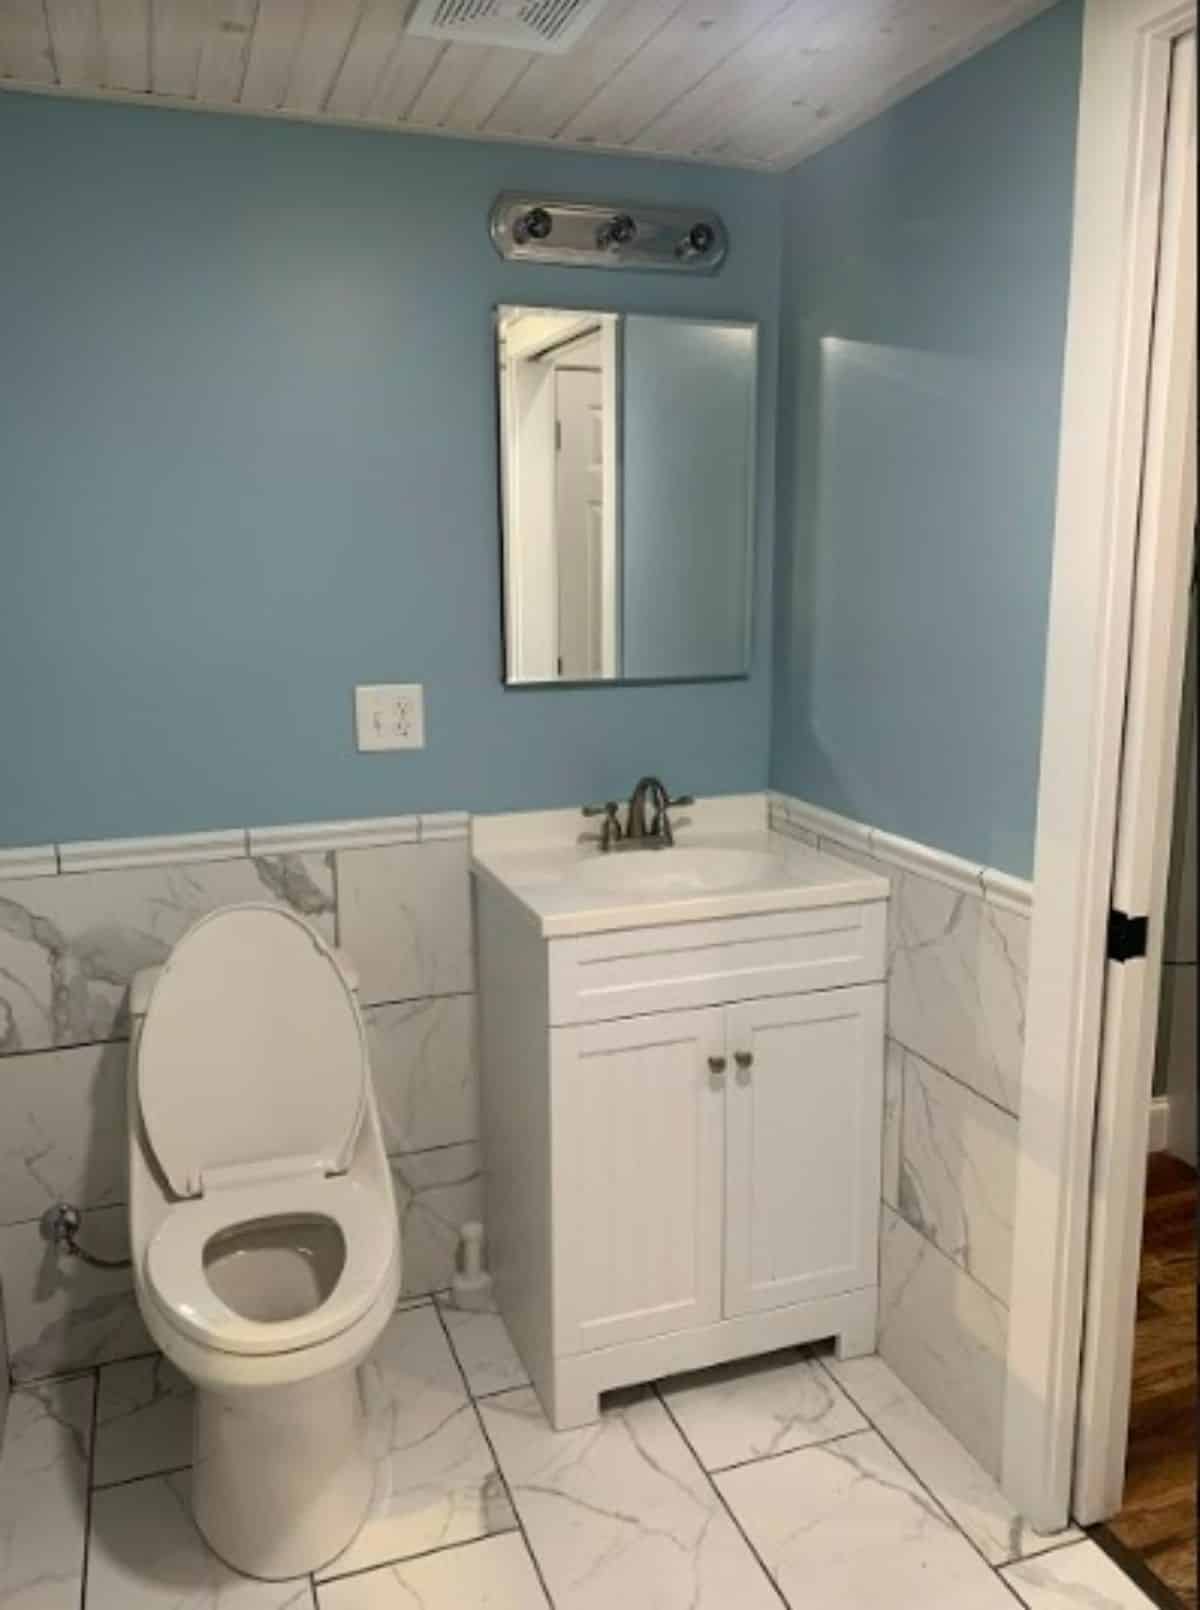 Standard toilet, sink with vanity & mirror in stunning bathroom of Airbnb Tiny Home